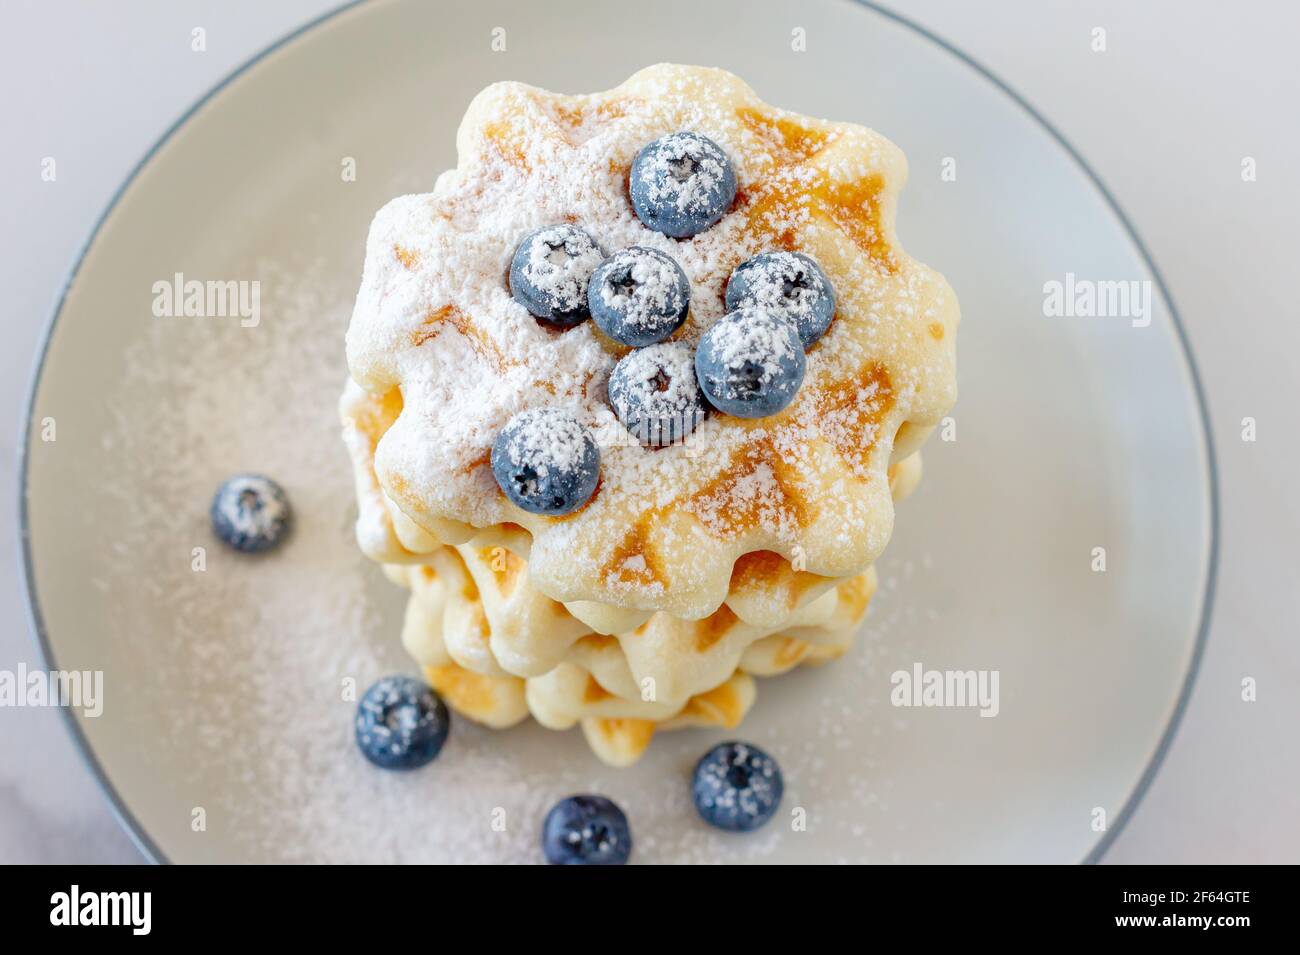 Homemade vanilla waffles with sugar powder and fersh blueberries on a plate, perfect family breakfast. Stock Photo